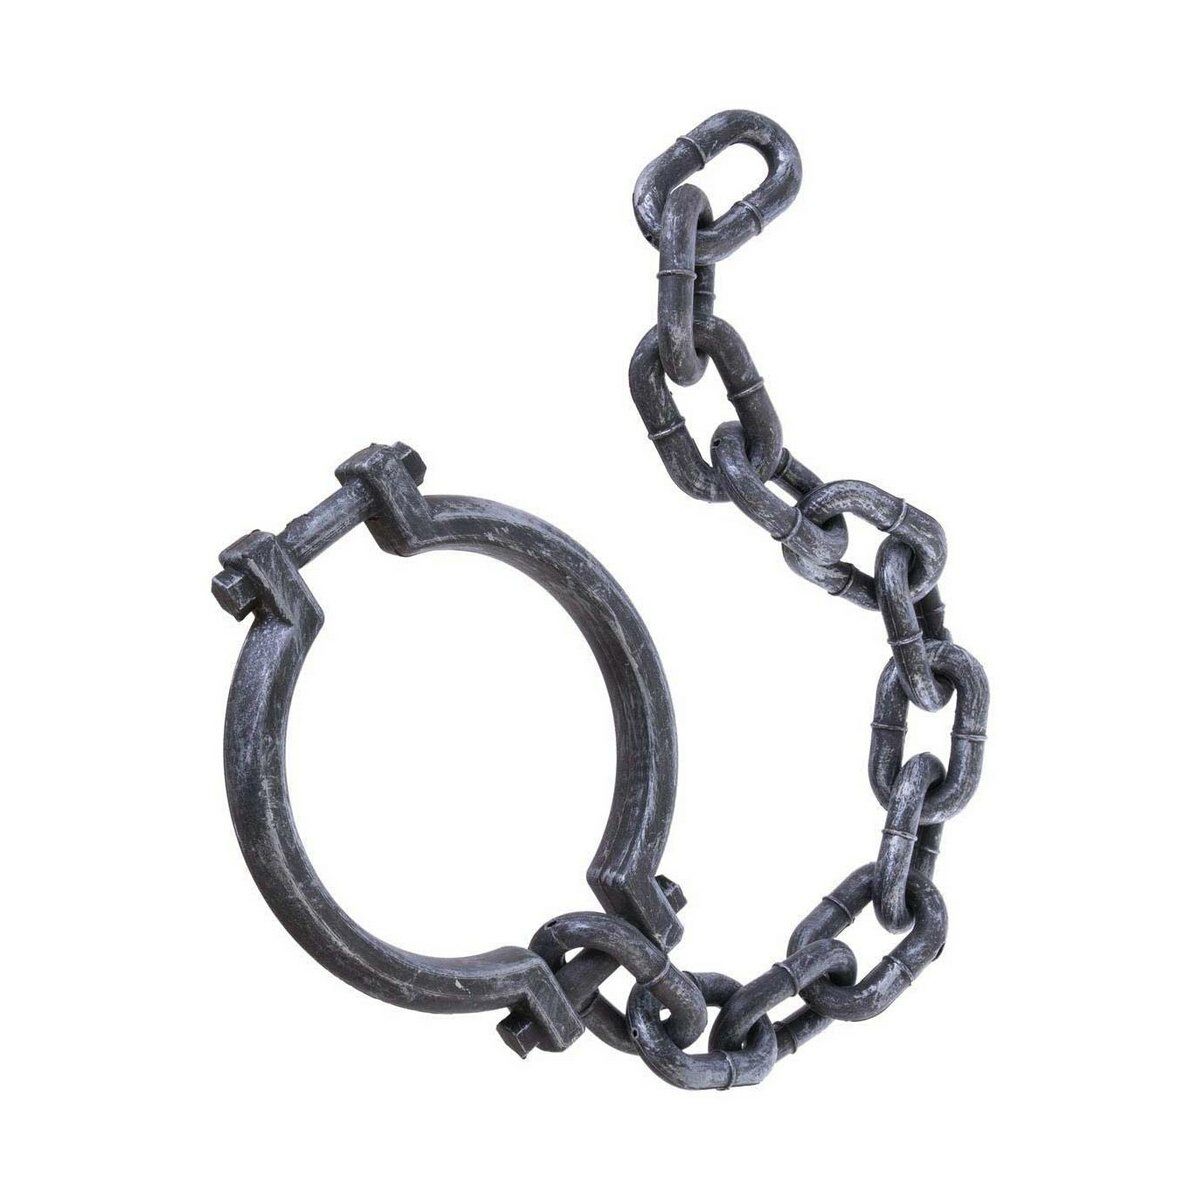 Chain My Other Me 120 x 26 x 5 cm Grey